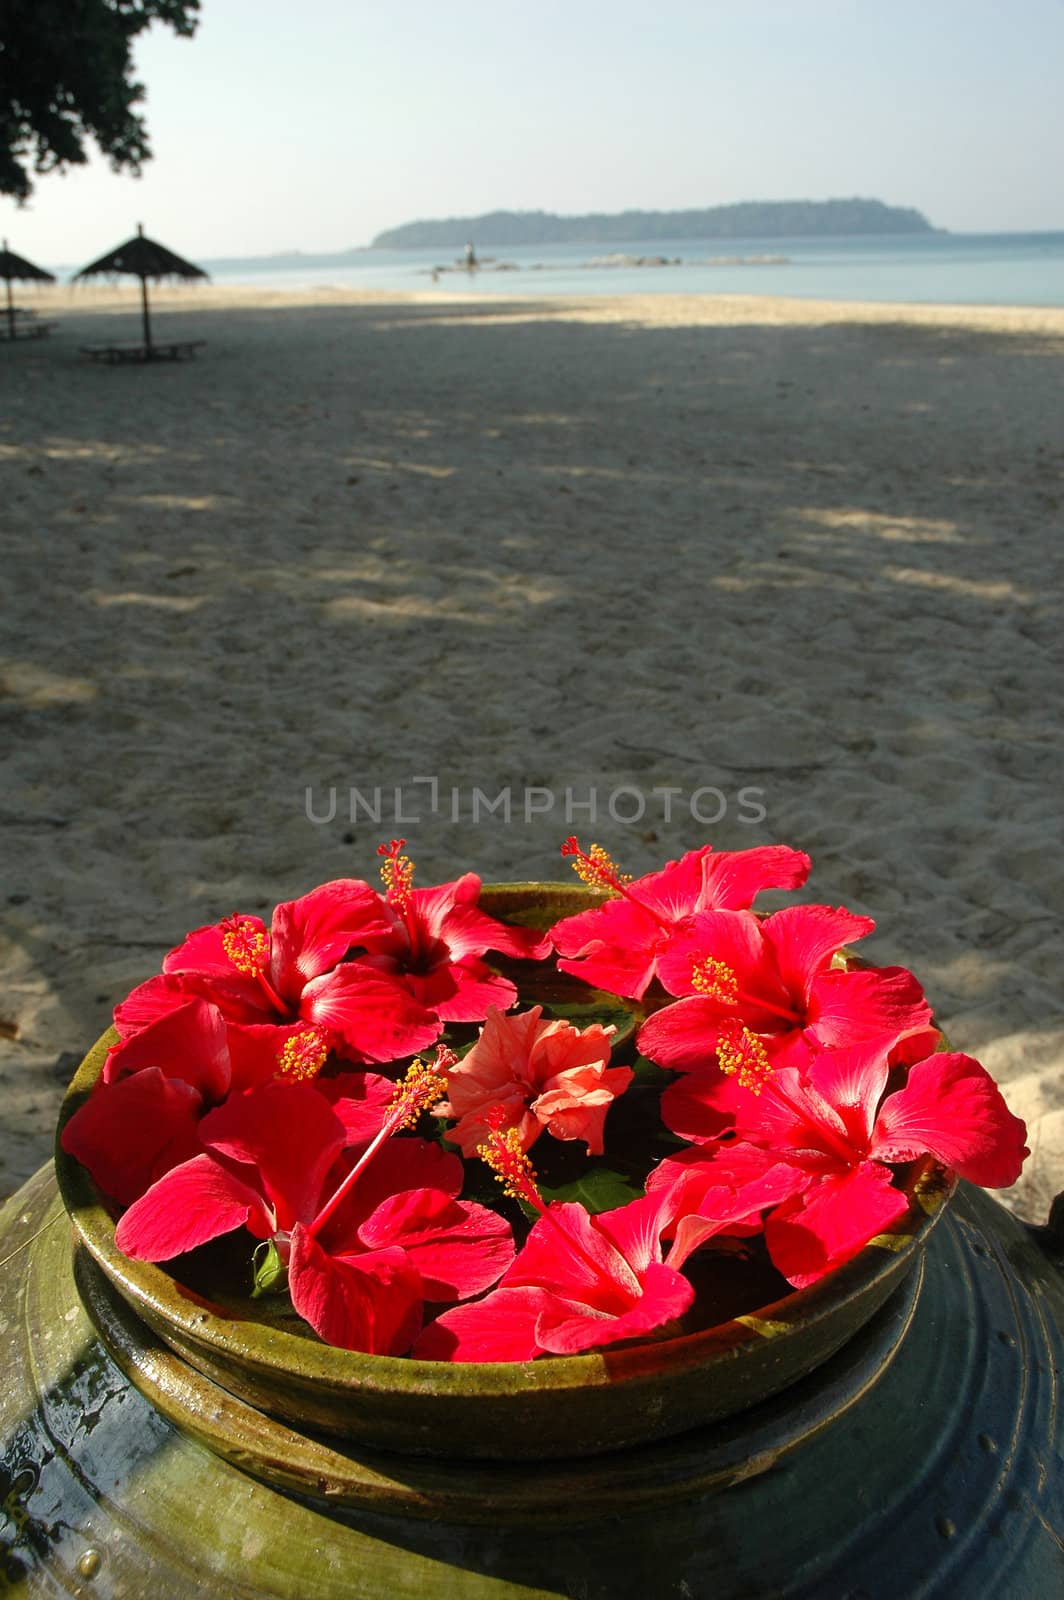 Malvaceae Hibiscus Flowers On A Beach by khwi